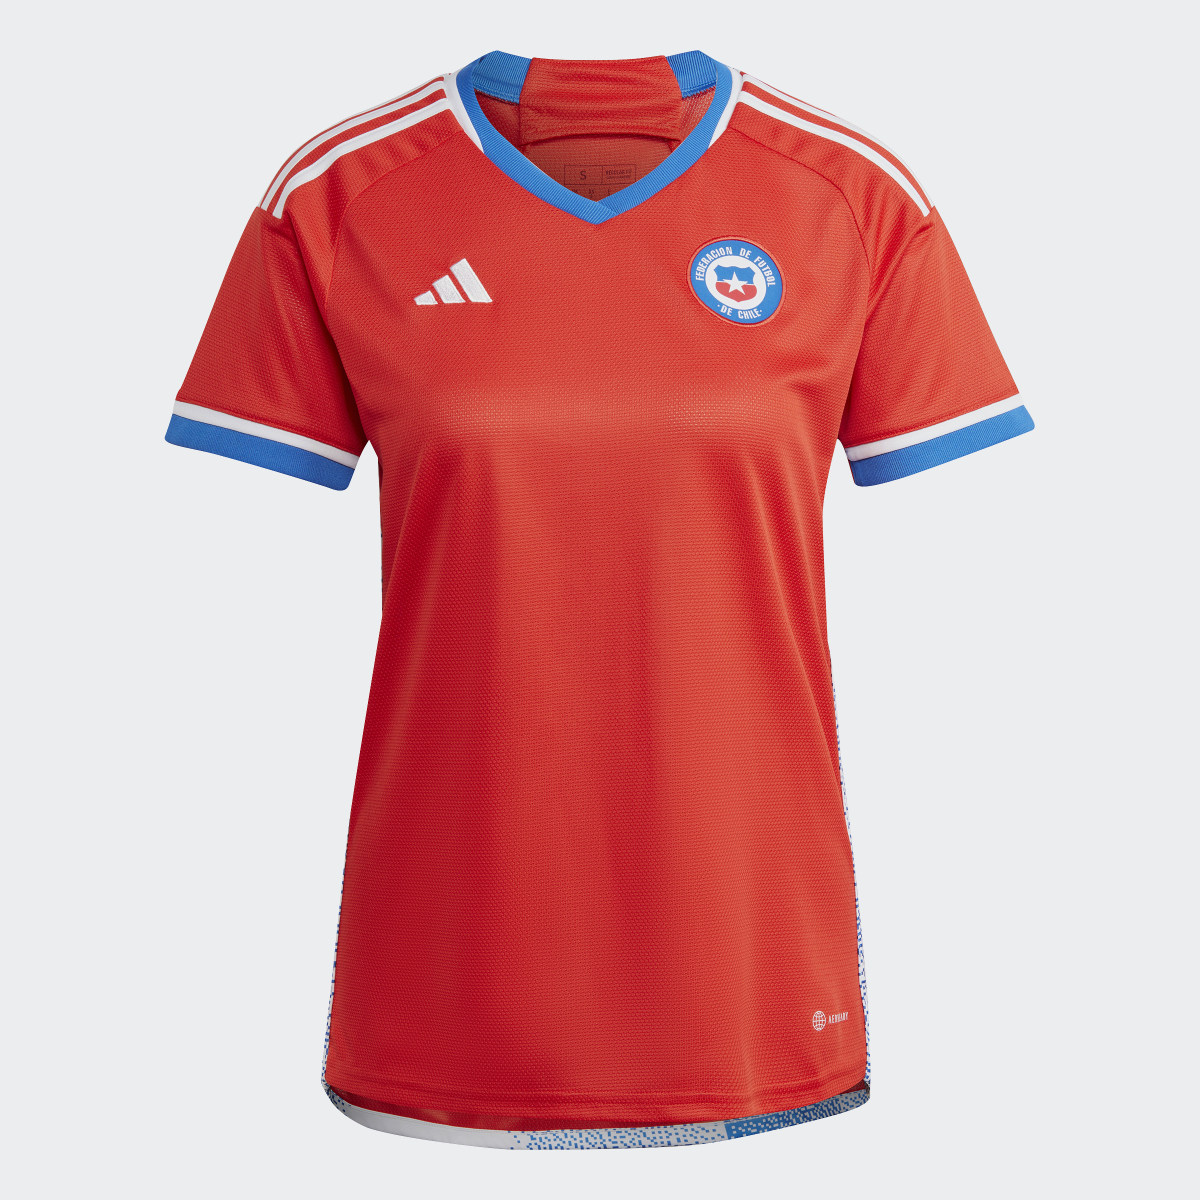 Adidas Chile 22 Home Jersey. 5